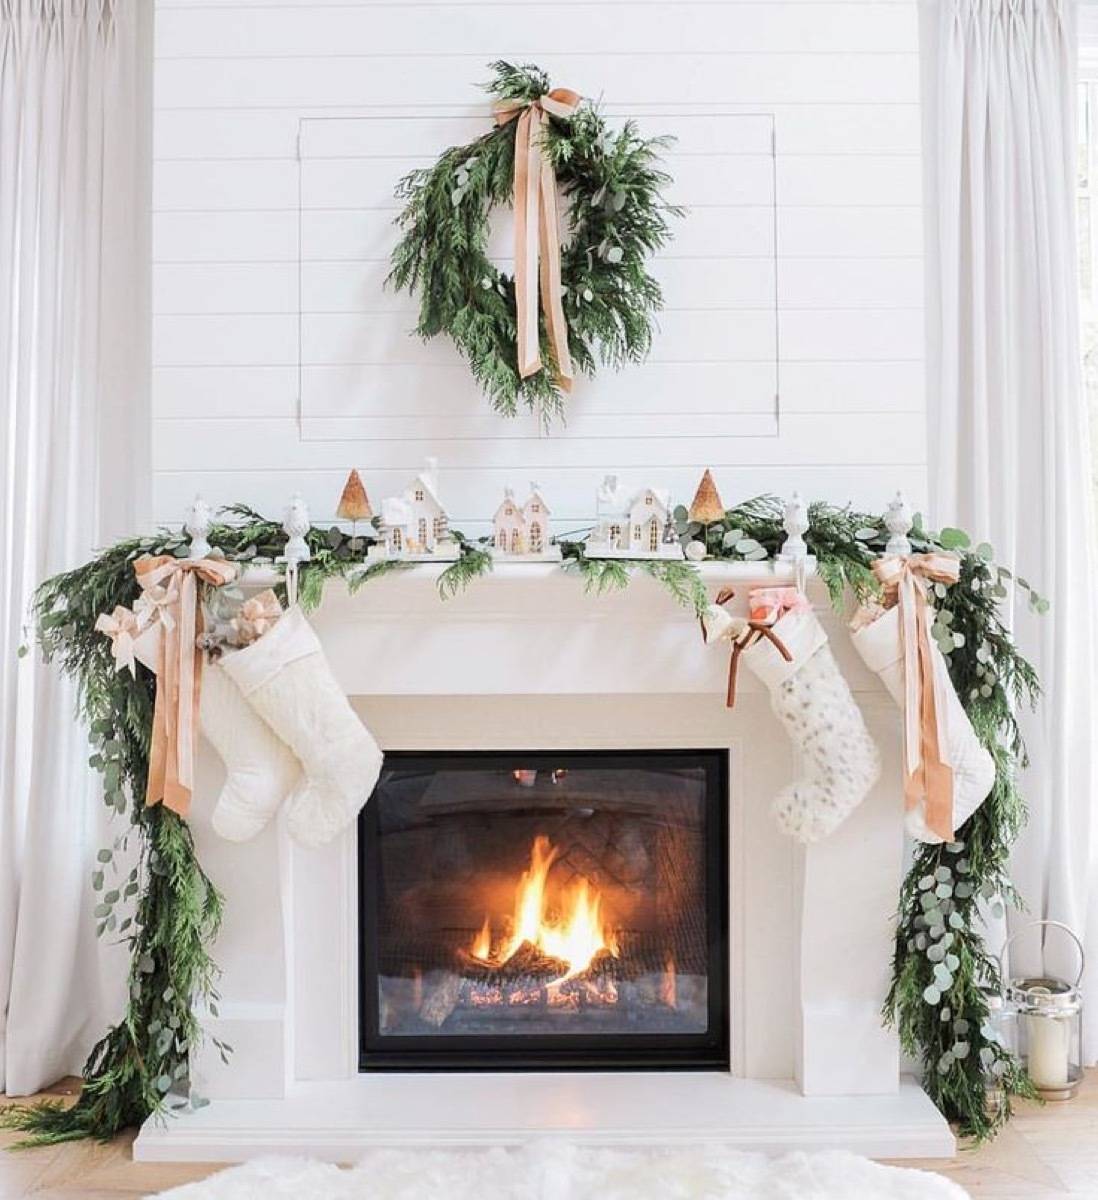 How to Style a Christmas Mantel for $60